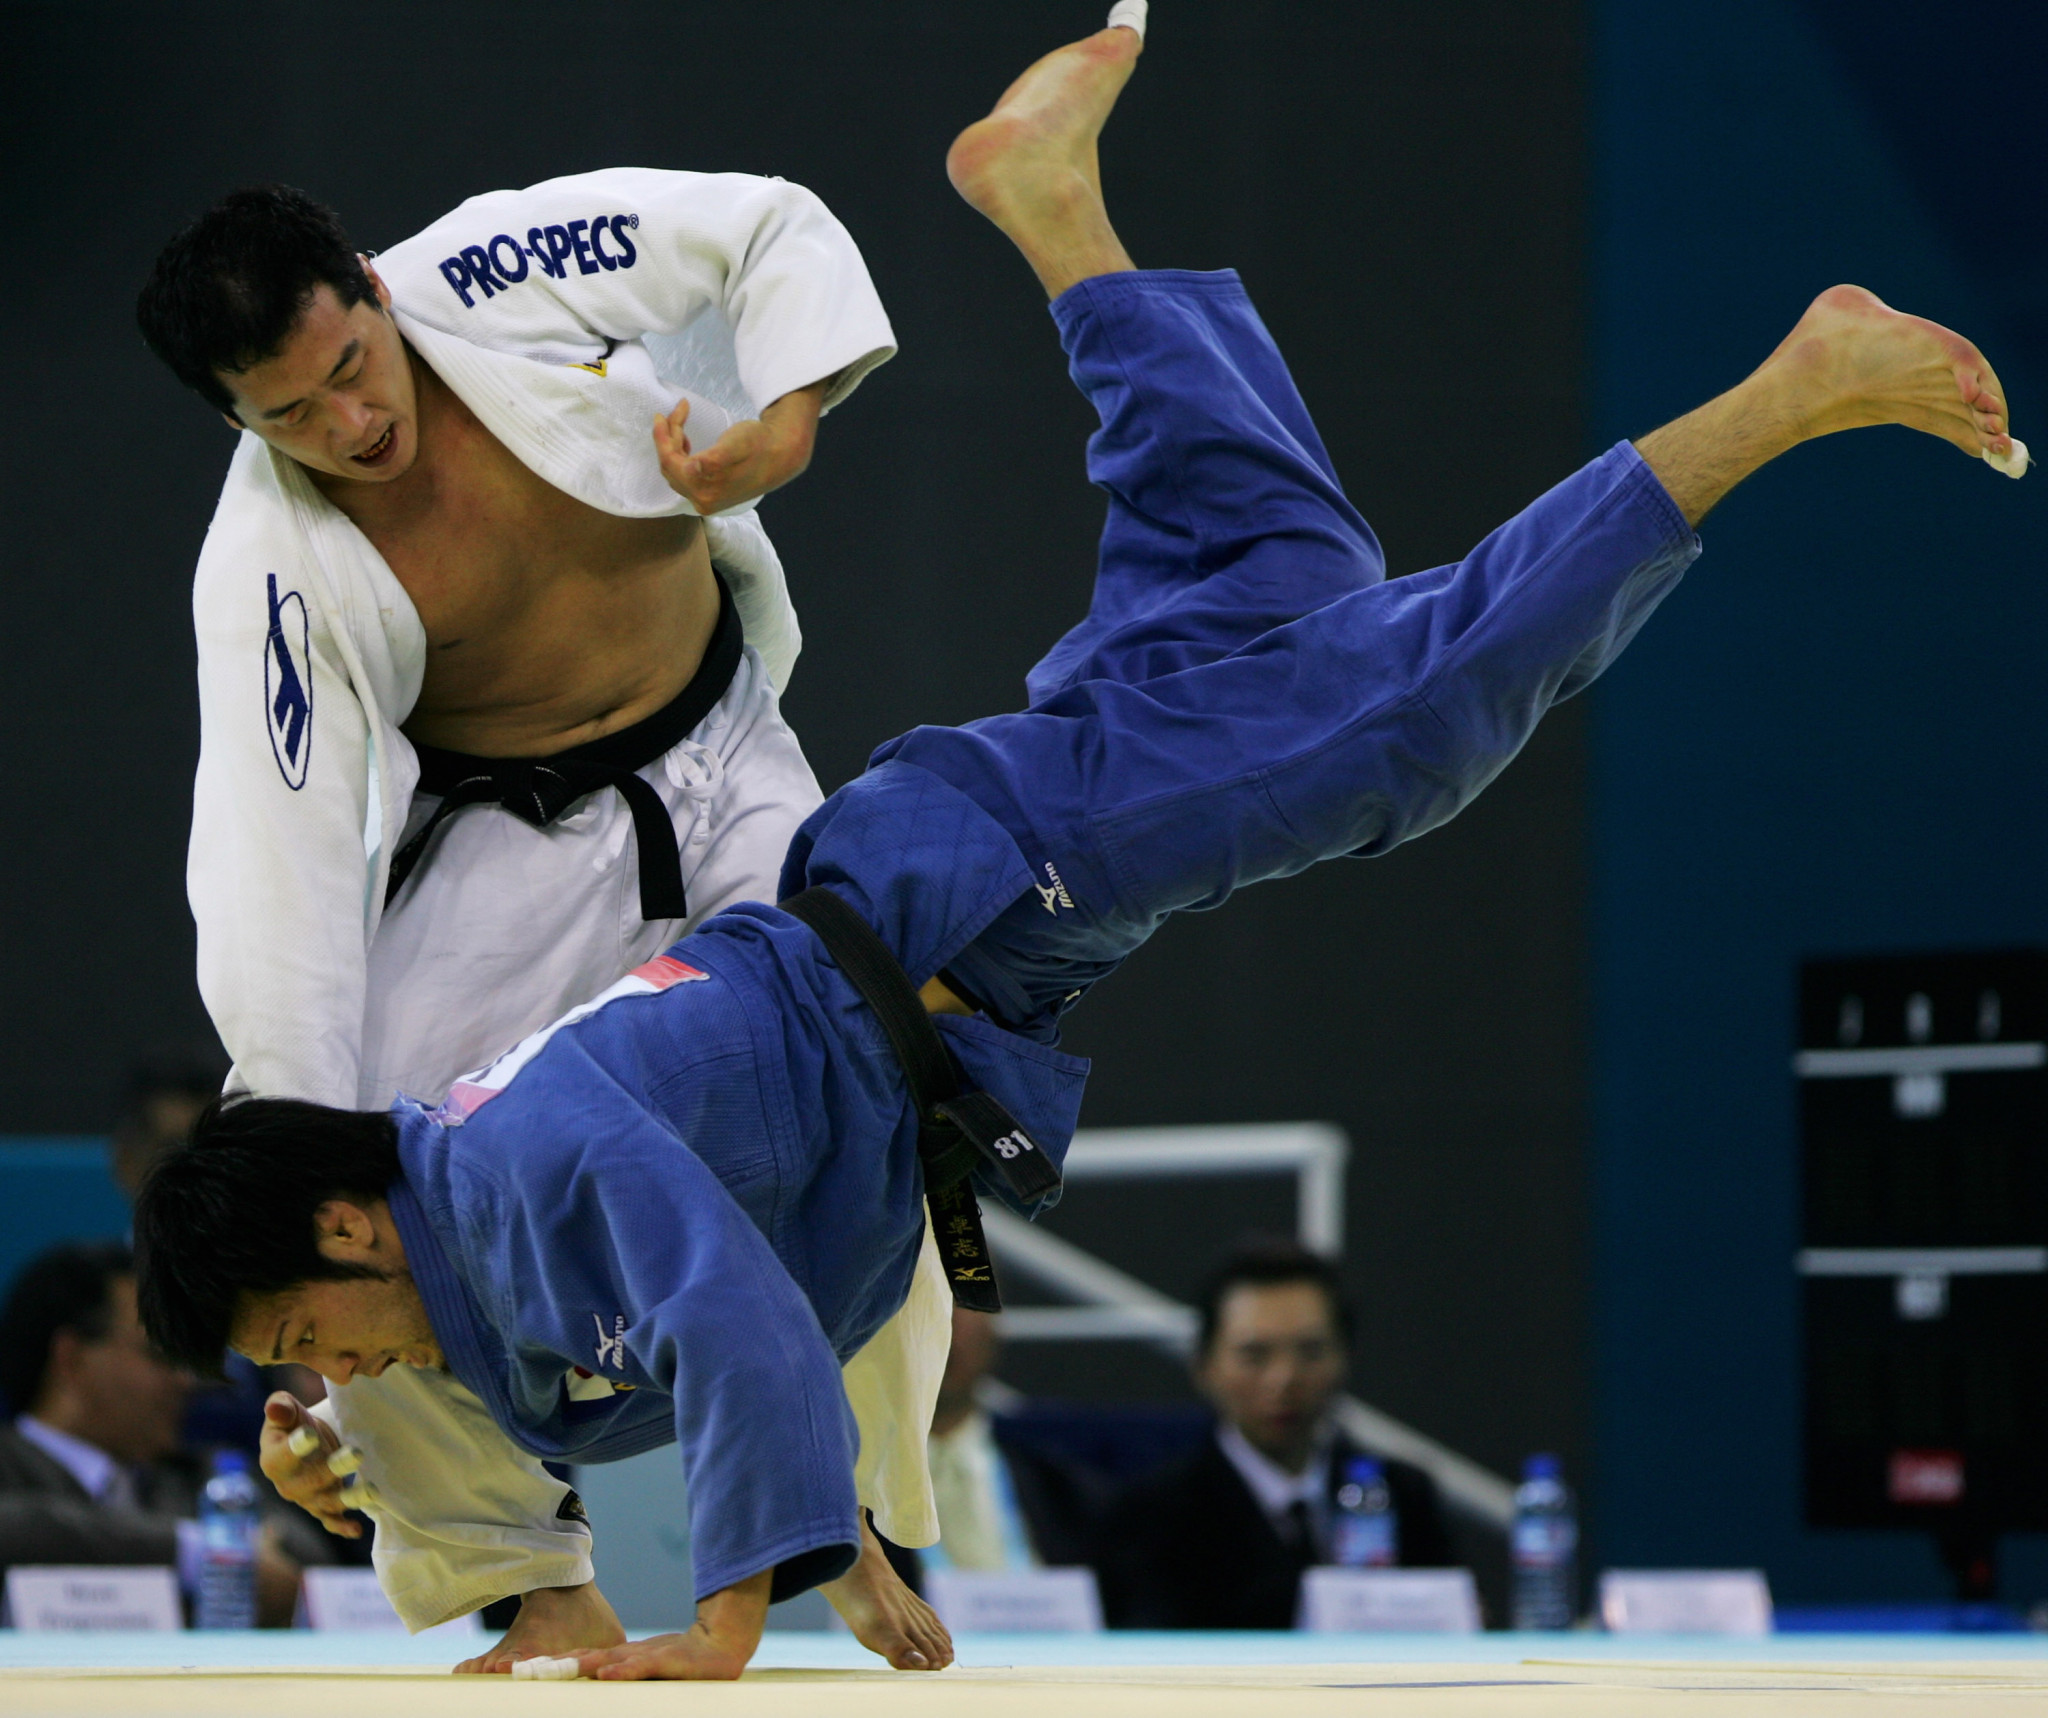 Min Sun Aea (White) of Korea competes with Takashi Ono (Blue) of Japan in the men's 81kg category final during the Good Luck Beijing 2007 Judo Open at the University of Science and Technology Gymnasium on November 16, 2007 in Beijing,China ©Getty Images